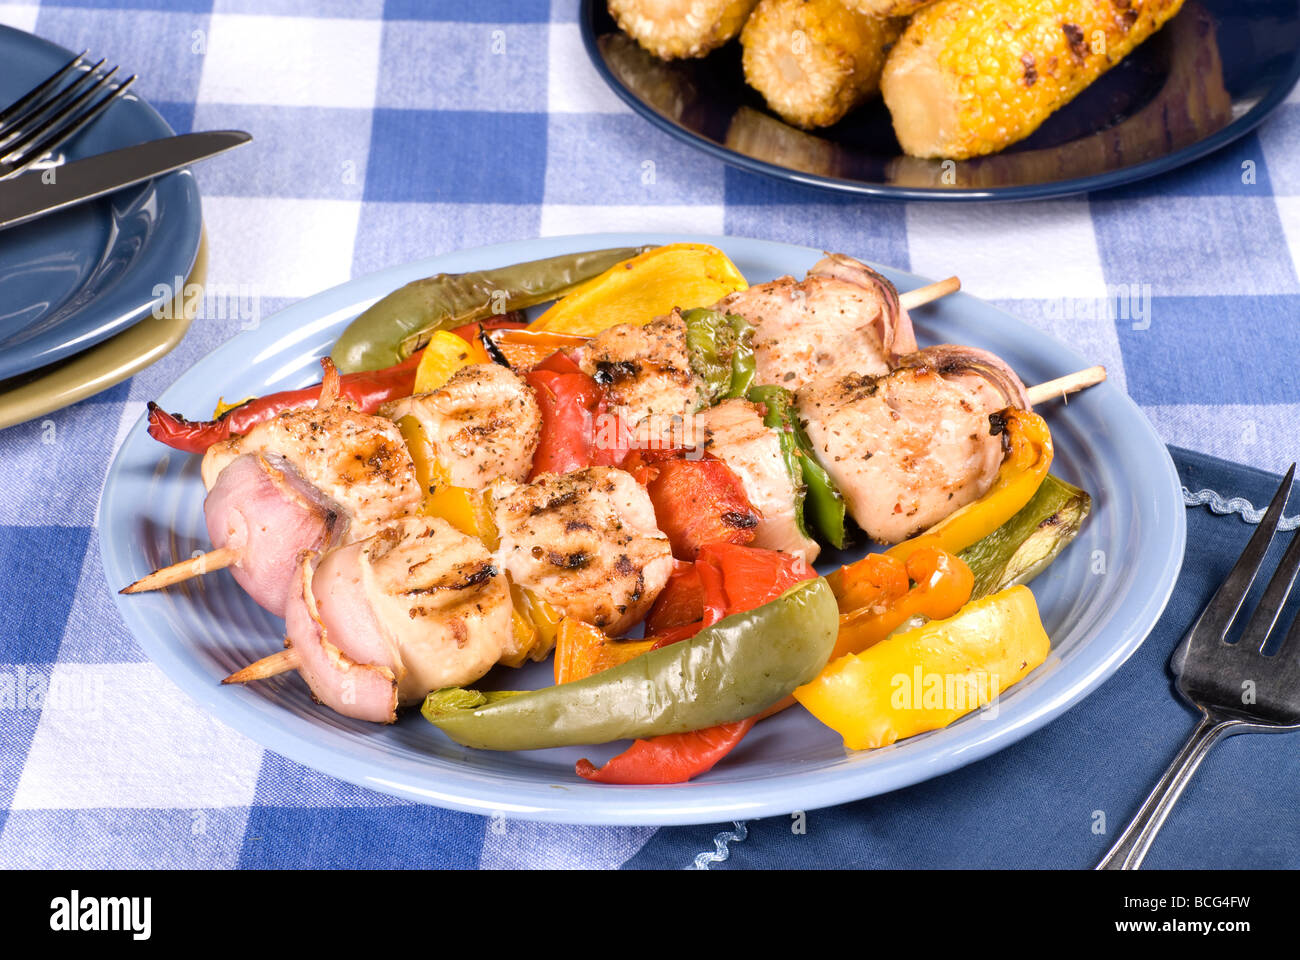 A barbecued chicken kebab dinner with corn on the cob on a picnic table setting Stock Photo